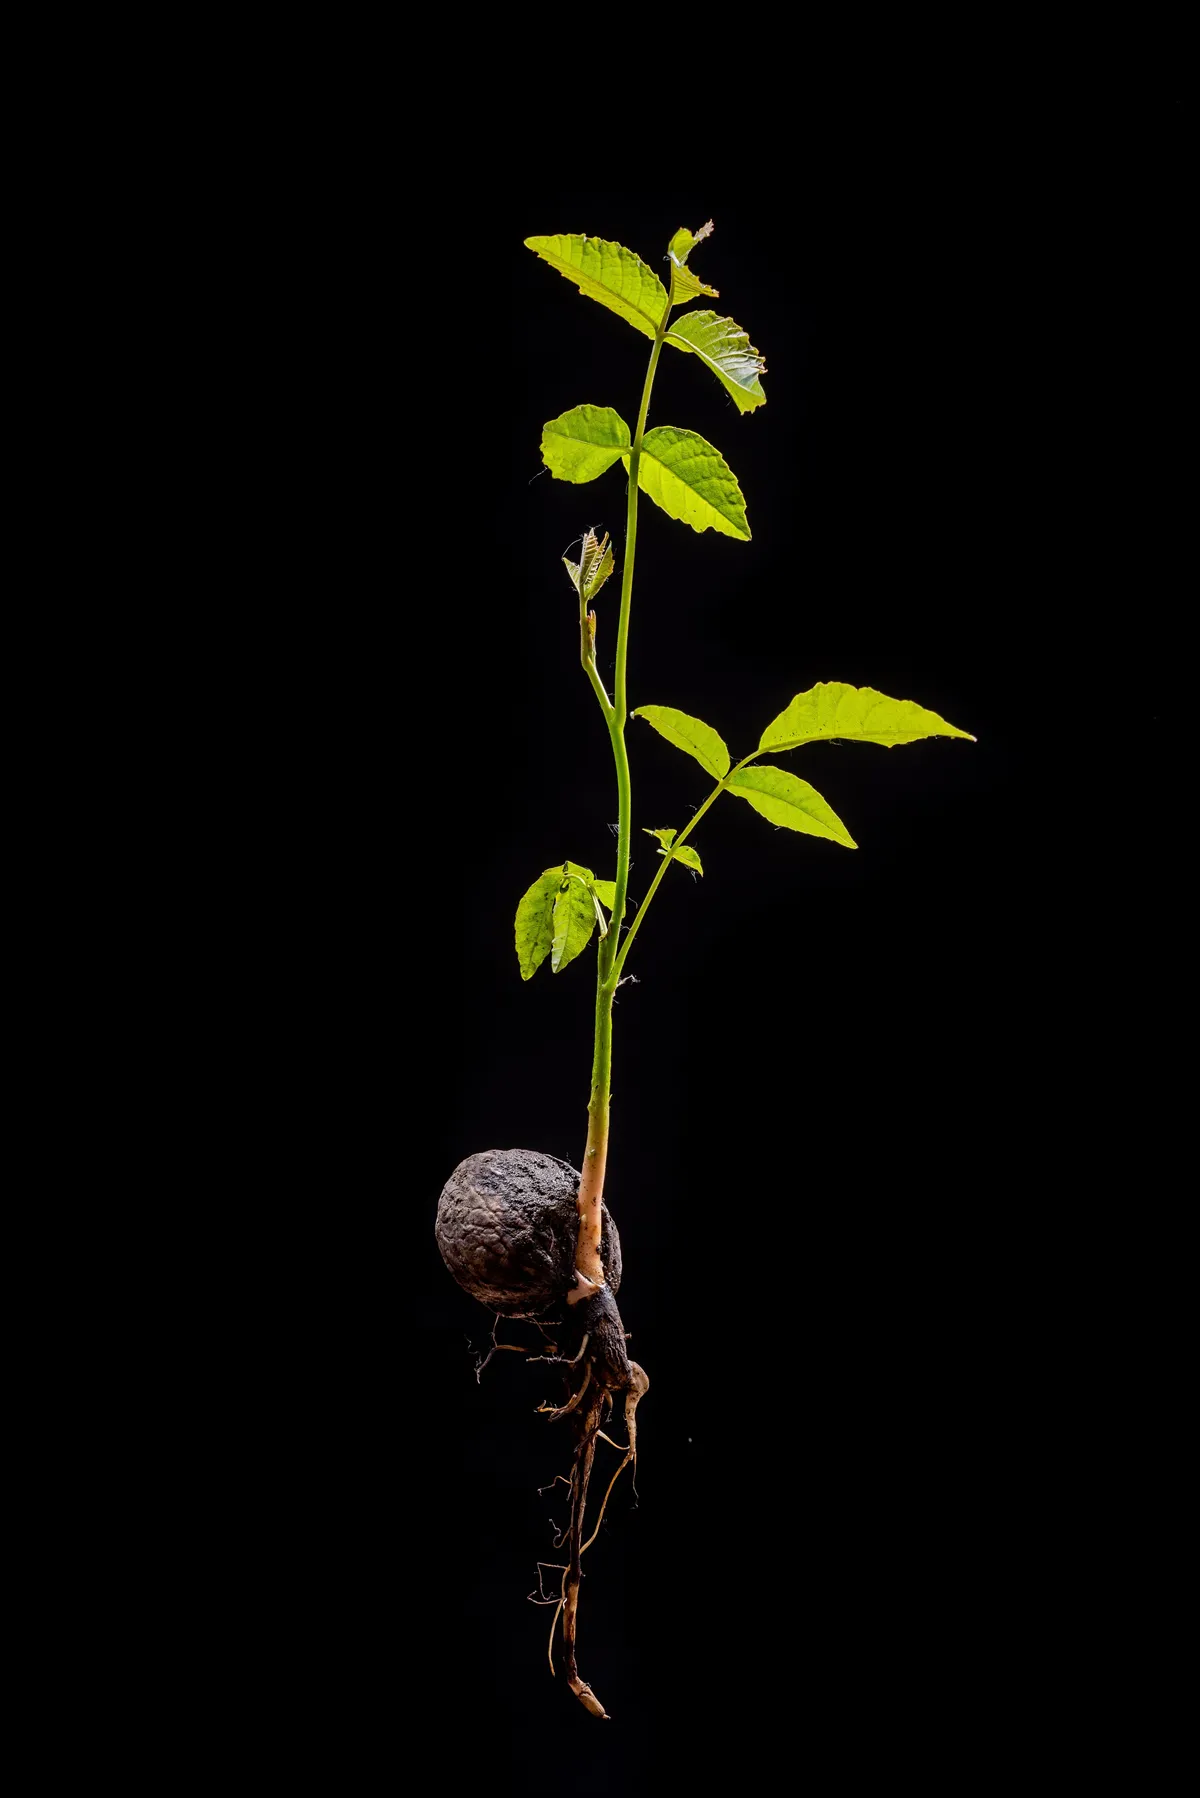 Young leaves of an walnut sprout with roots isolated front of a black background. Complete walnut tree.